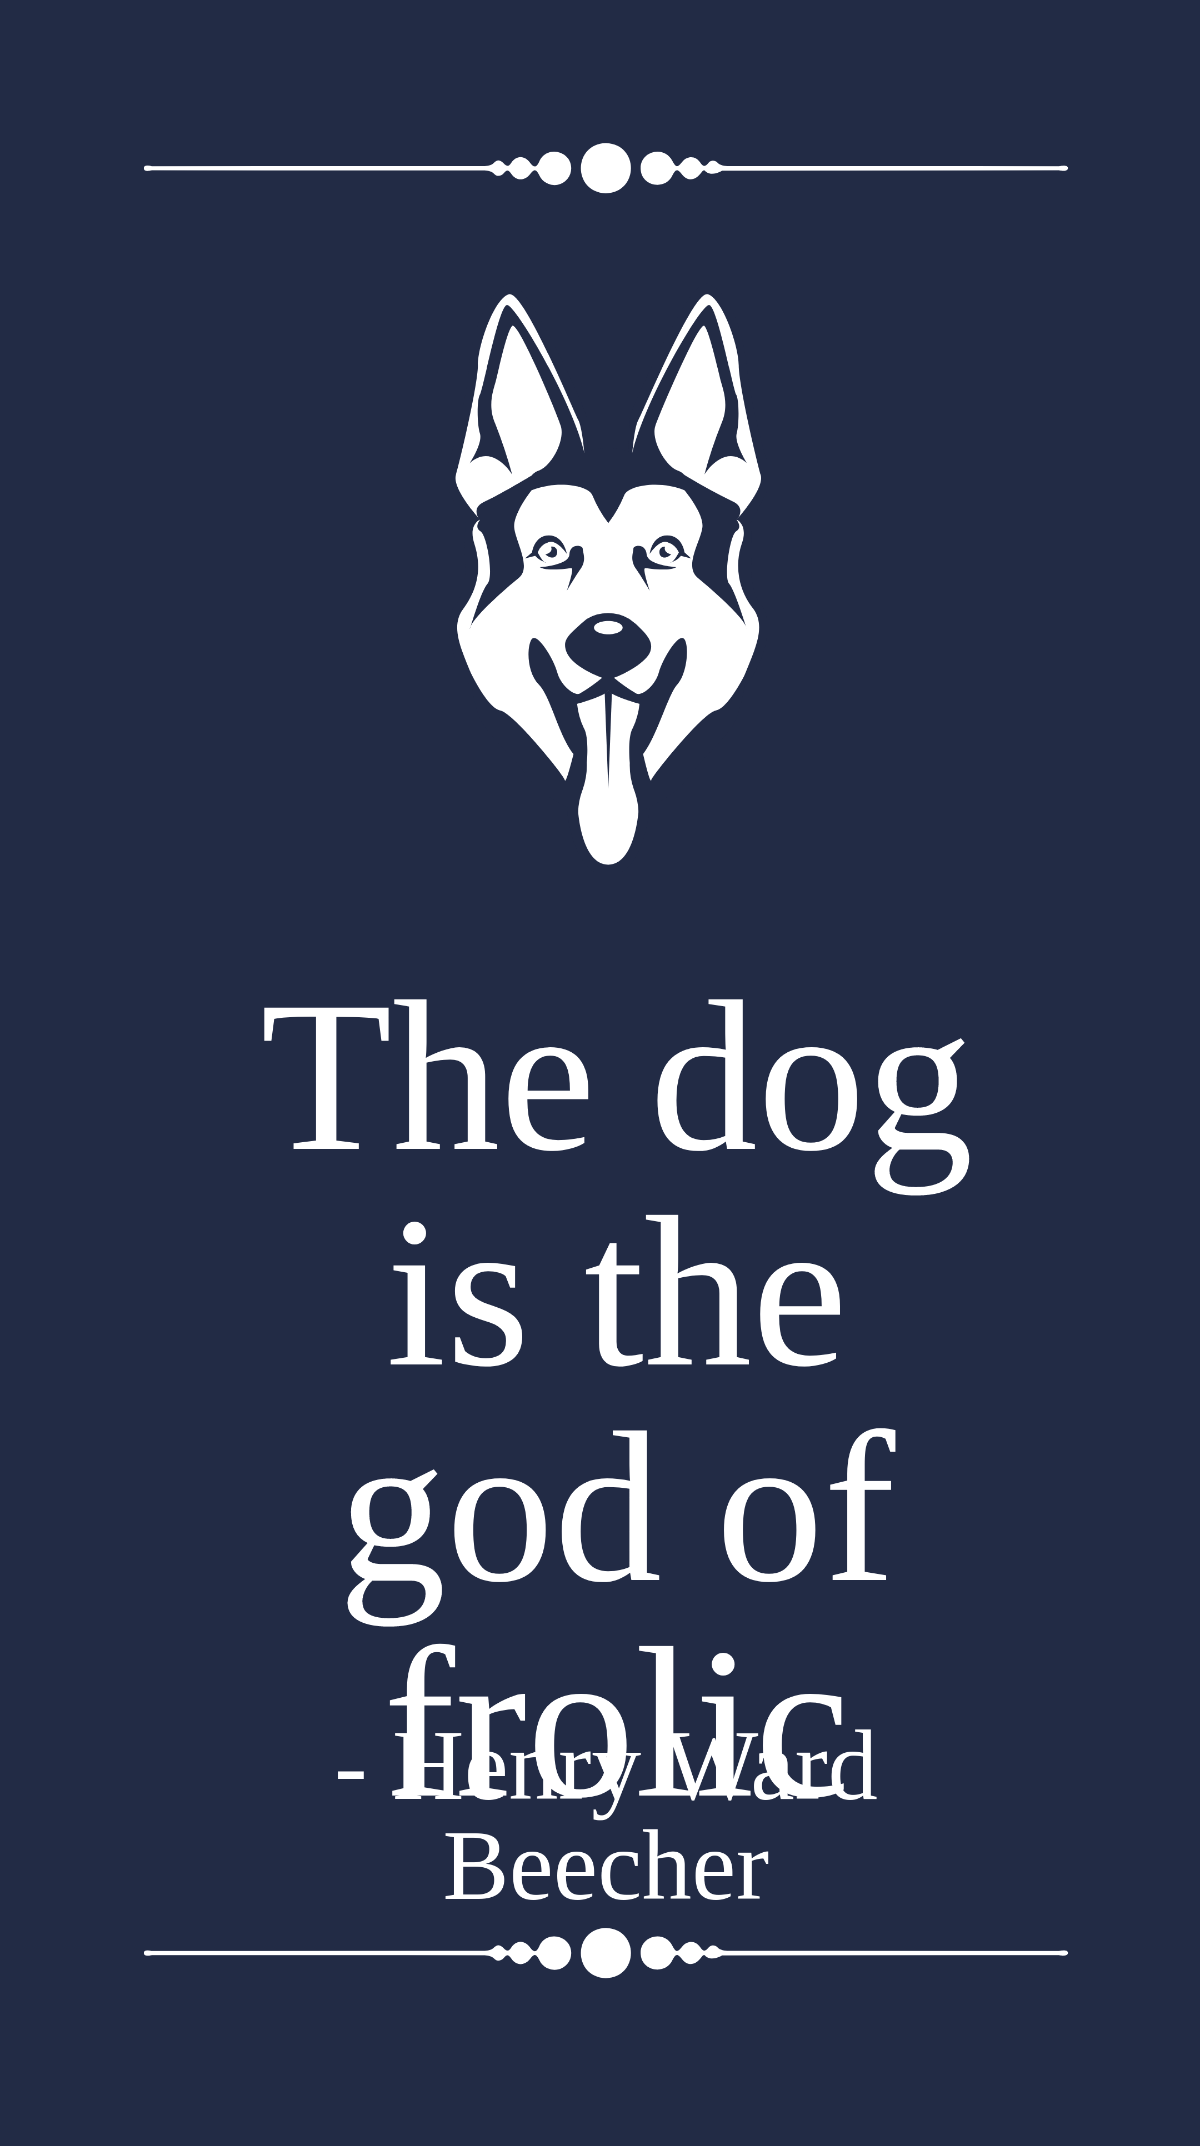 Henry Ward Beecher - The dog is the god of frolic